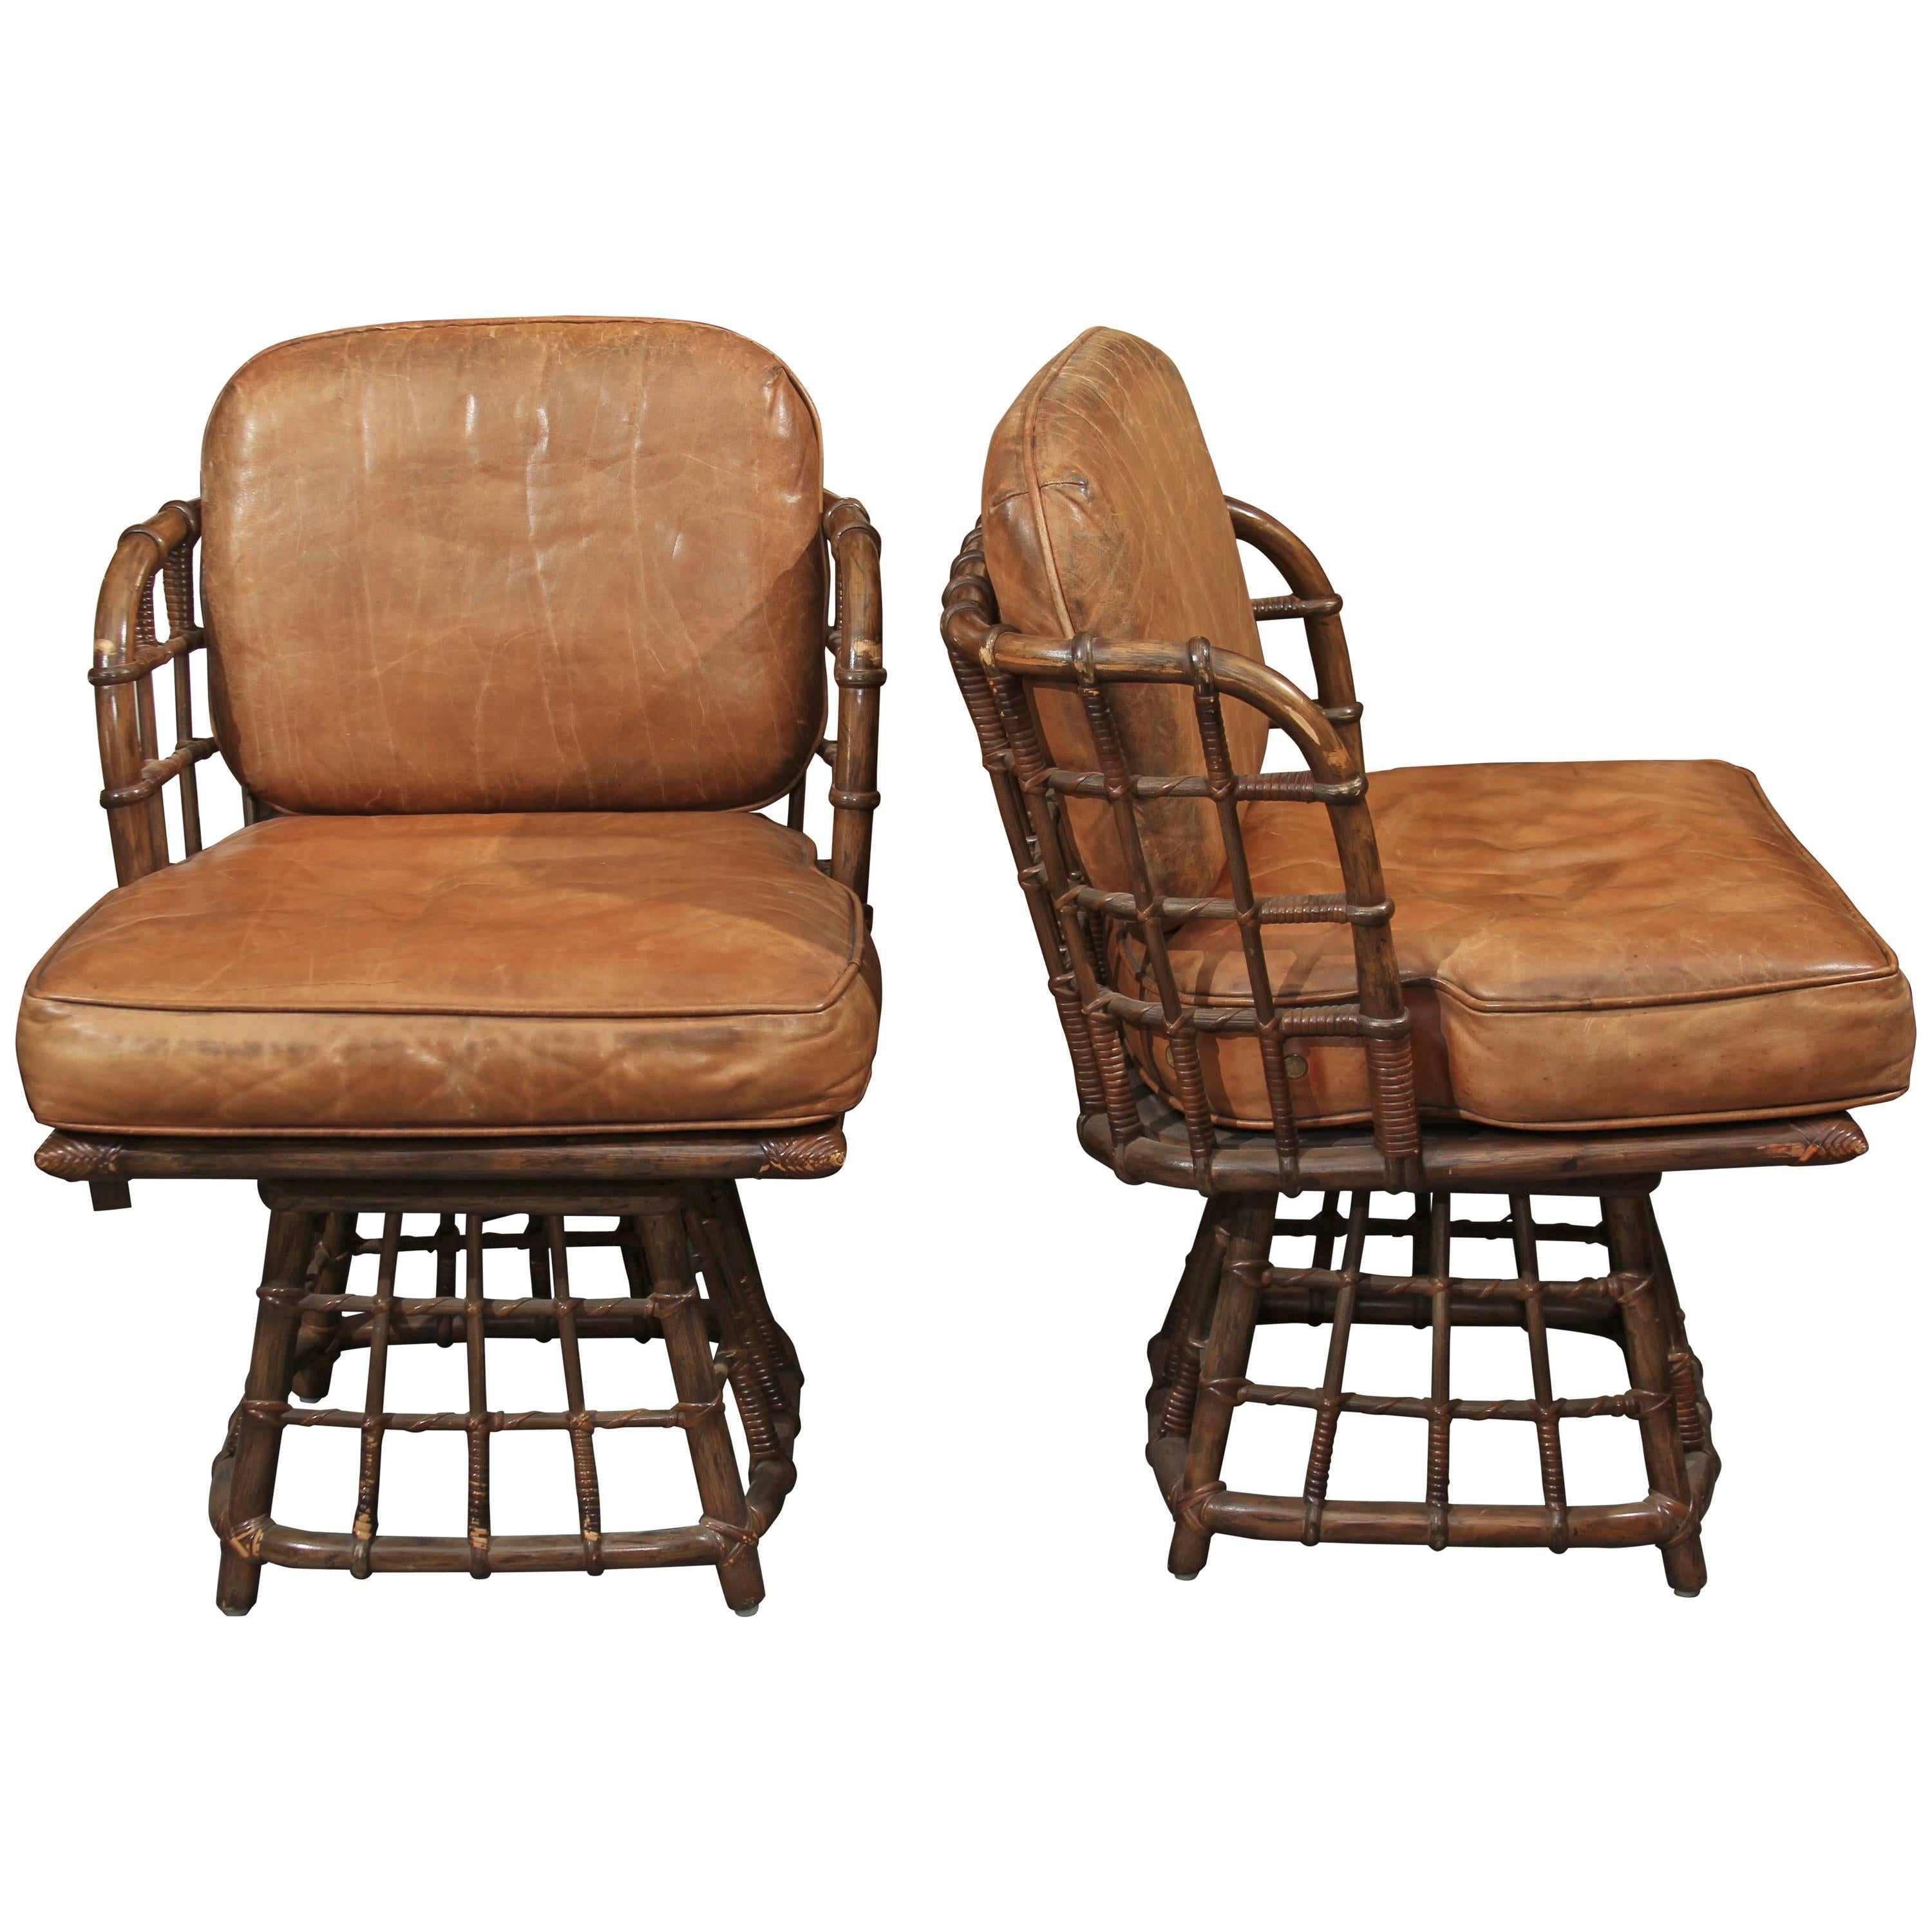 Pair of Maguire Swivel Chairs